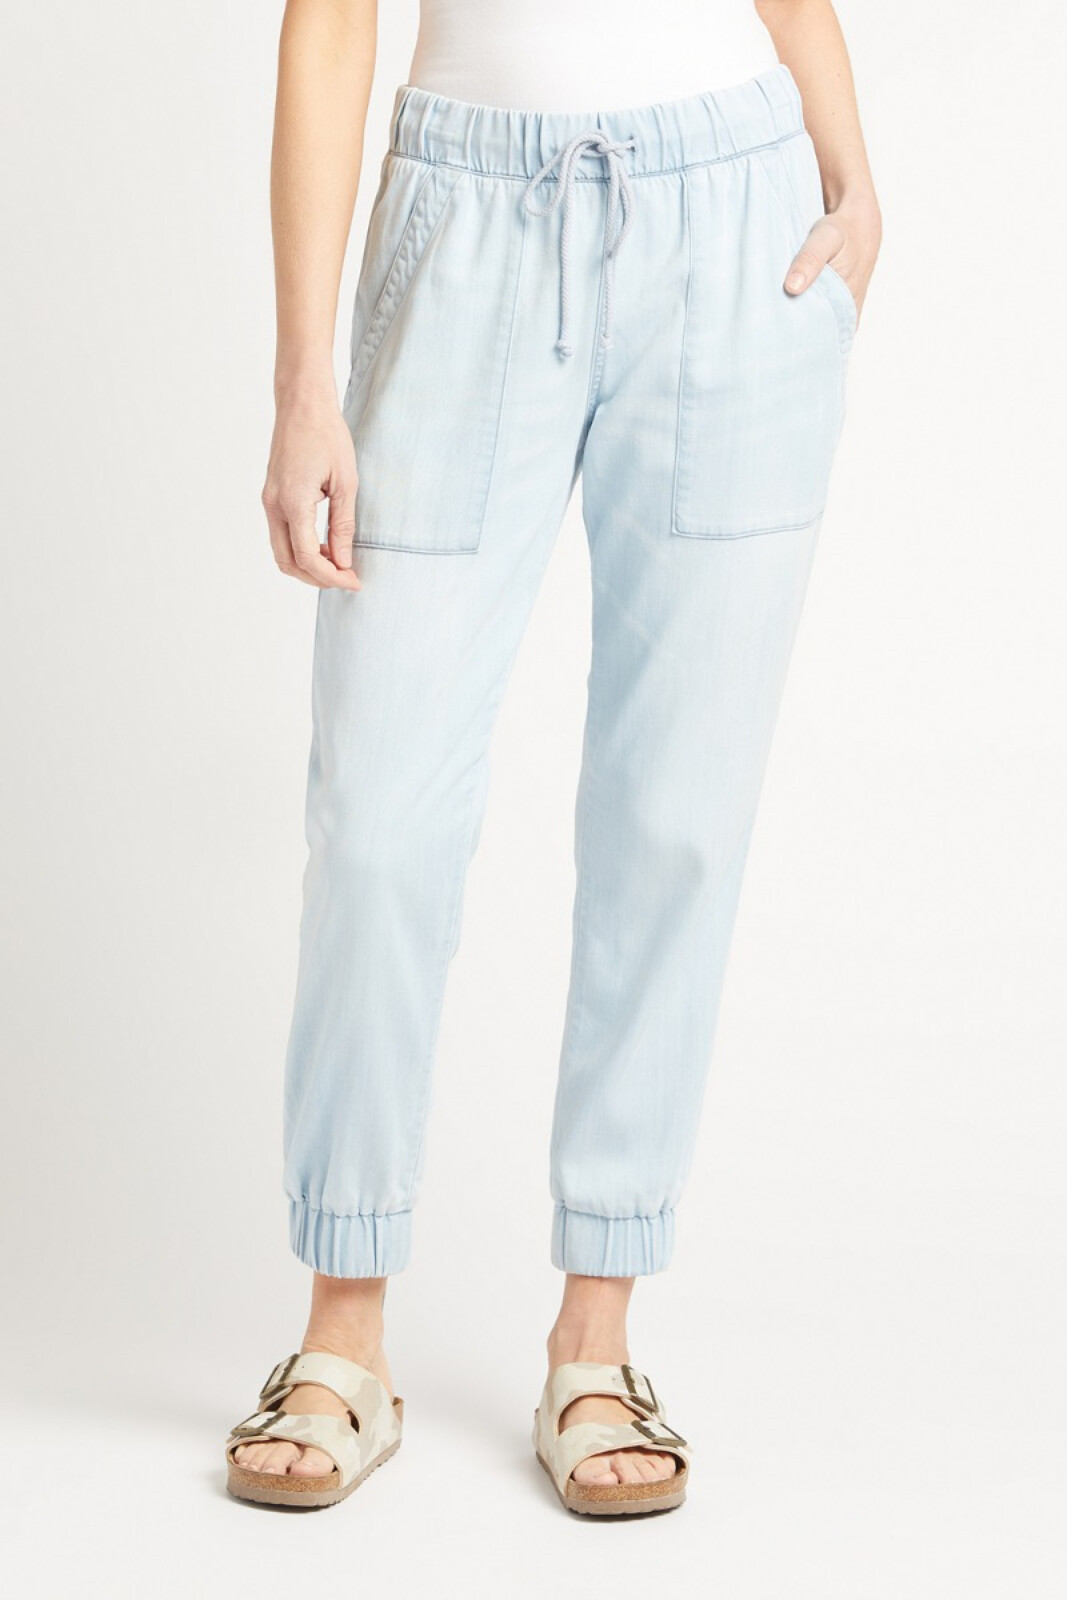 CLOTH AND STONE Chambray Jogger | EVEREVE